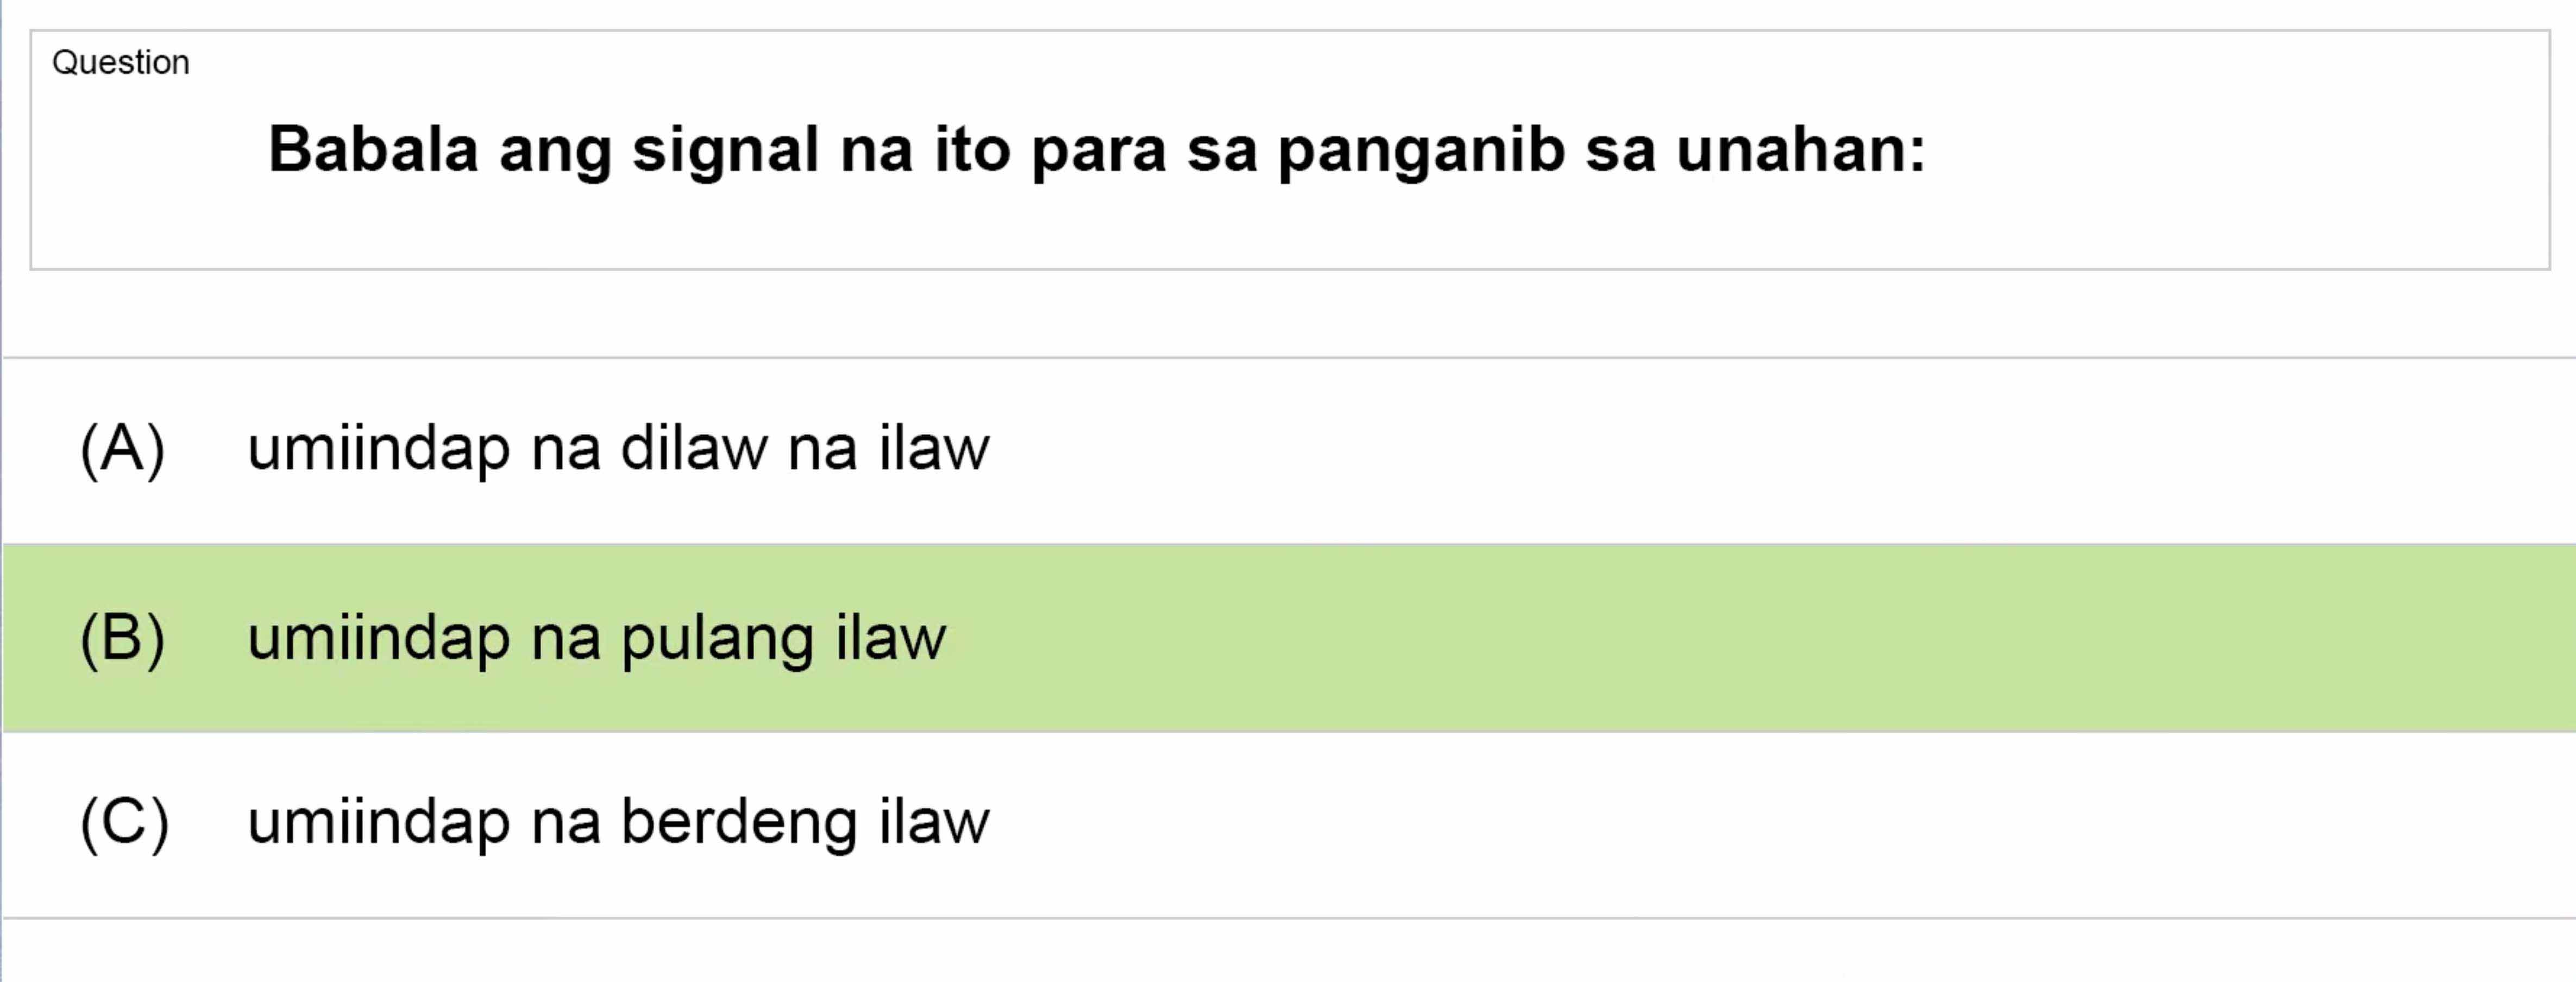 LTO Tagalog non professional exam reviewer light vehicle 3 (30)